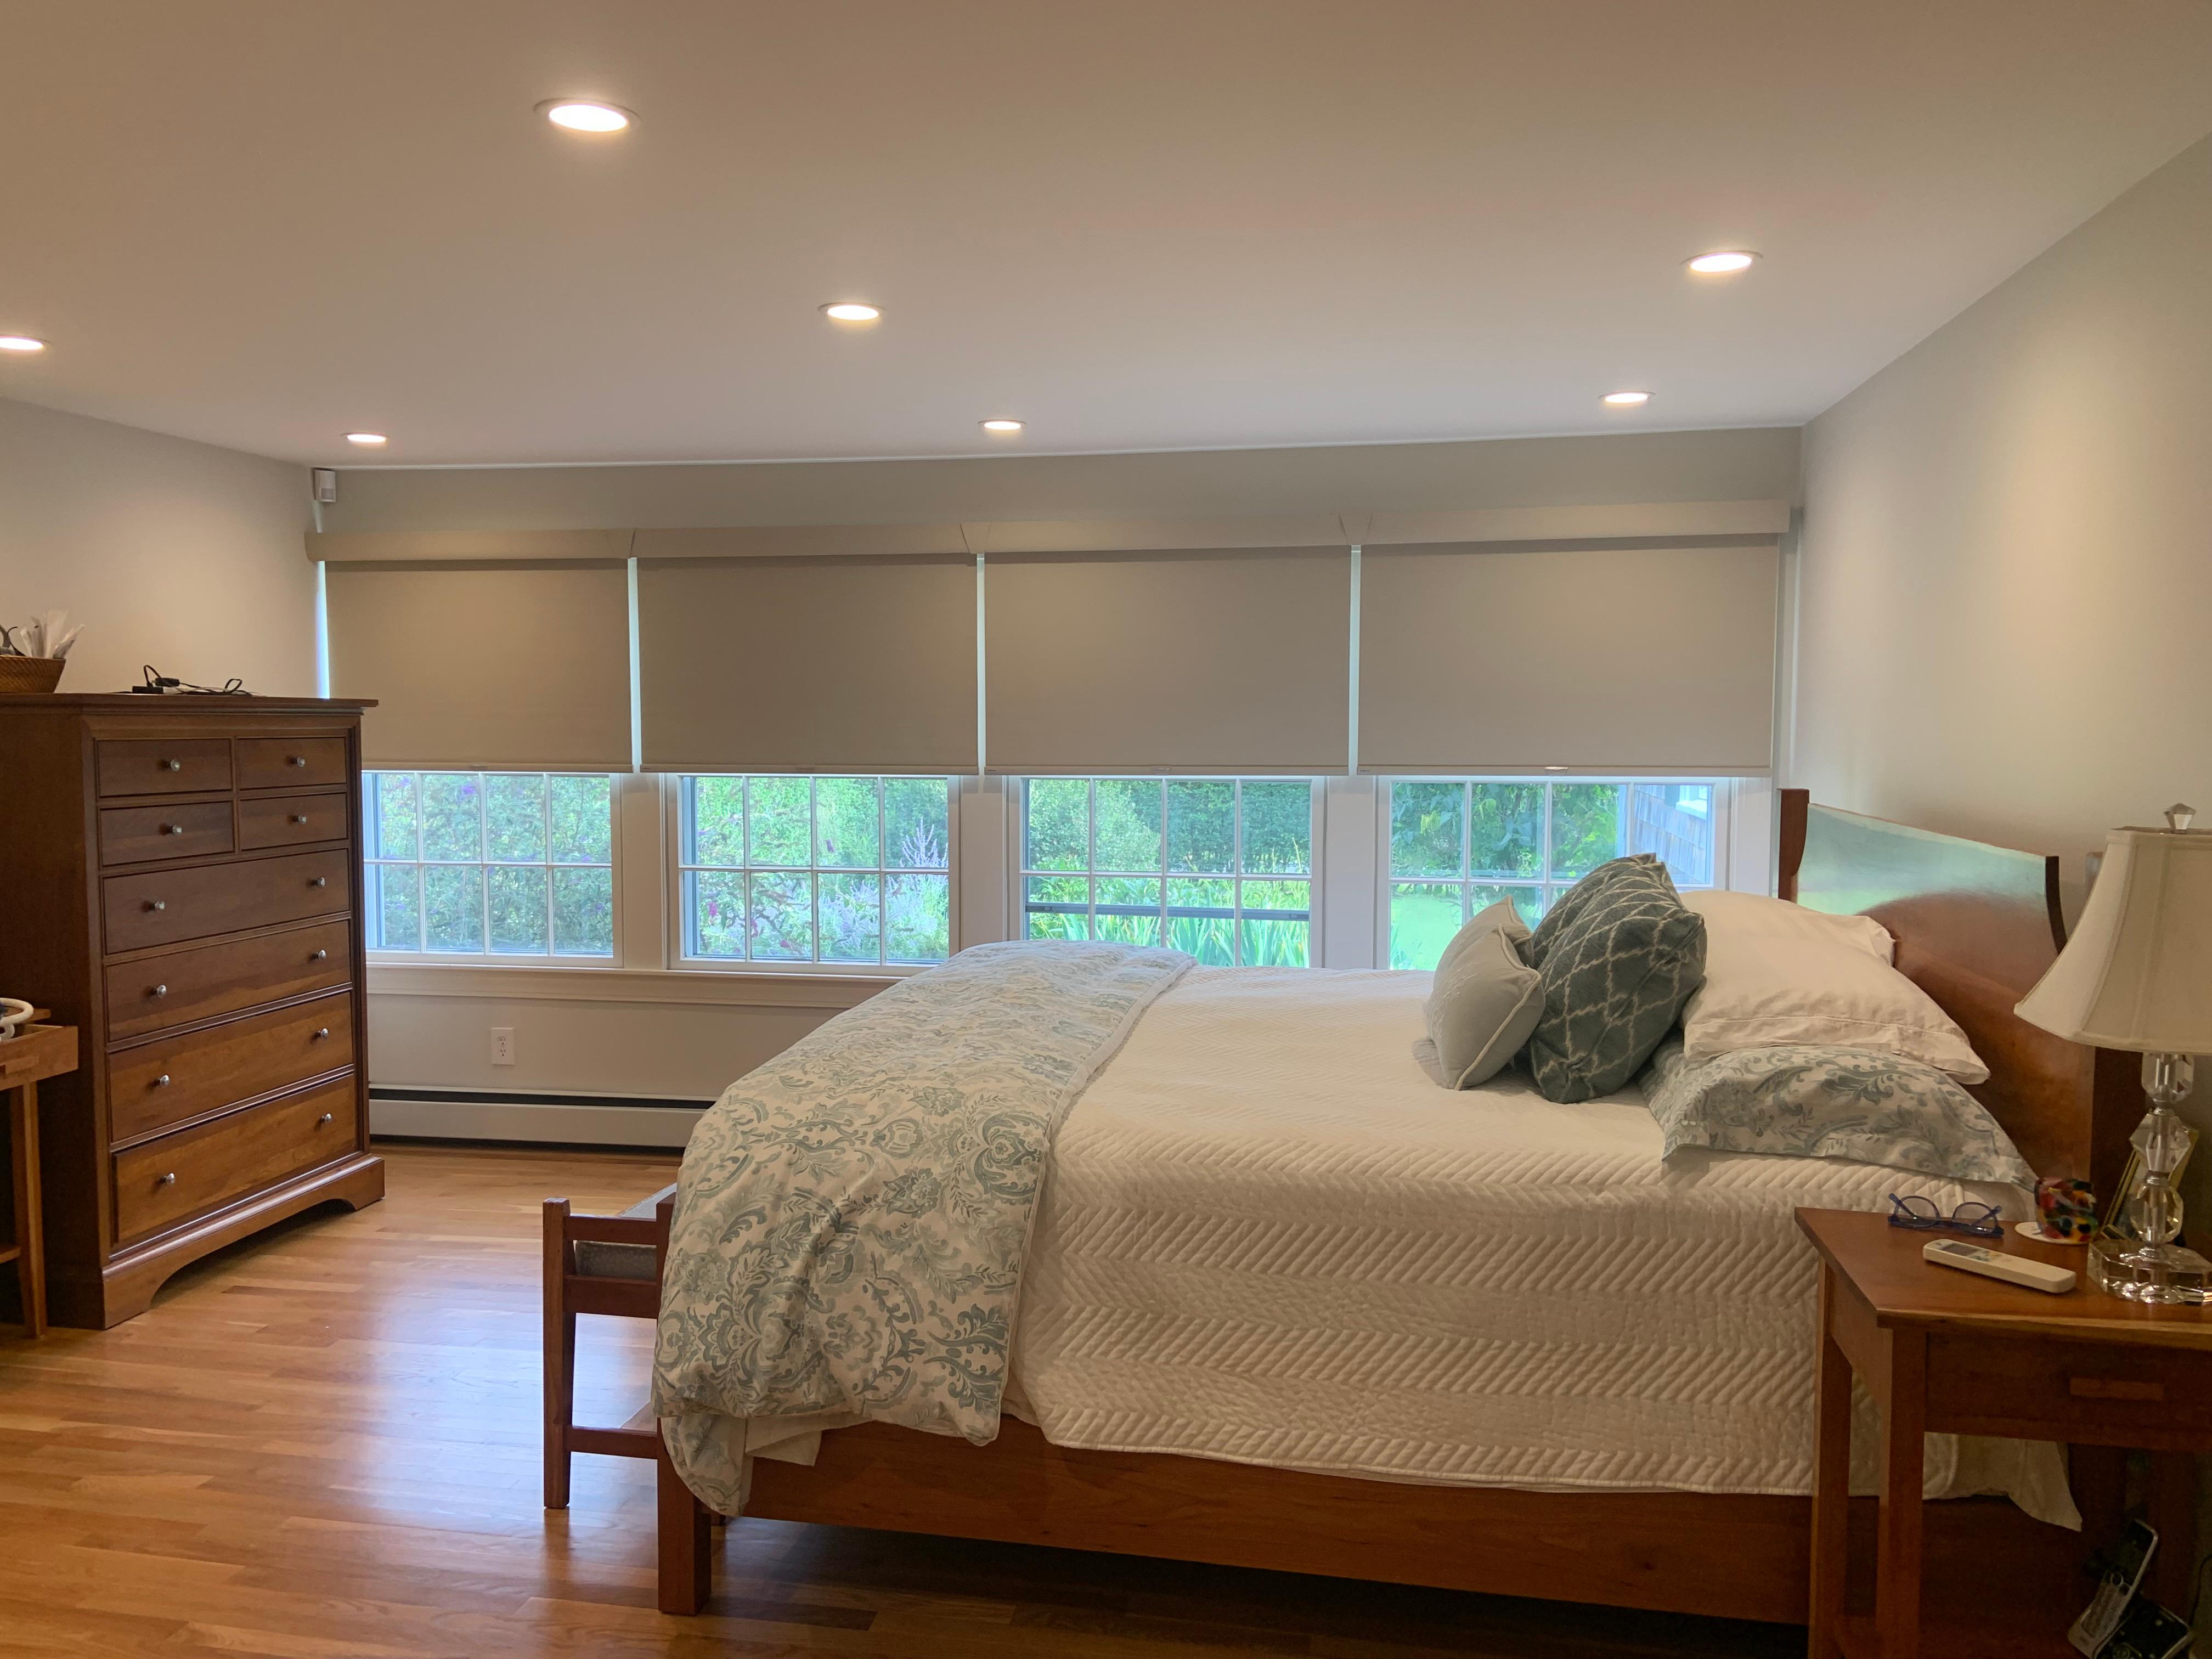 Betcha can't tell these windows are all different sizes! Our expert designer, Stacey, was able to make them look seamlessly uniform! We love these roller shades in this lovely Bristol, RI bedroom.